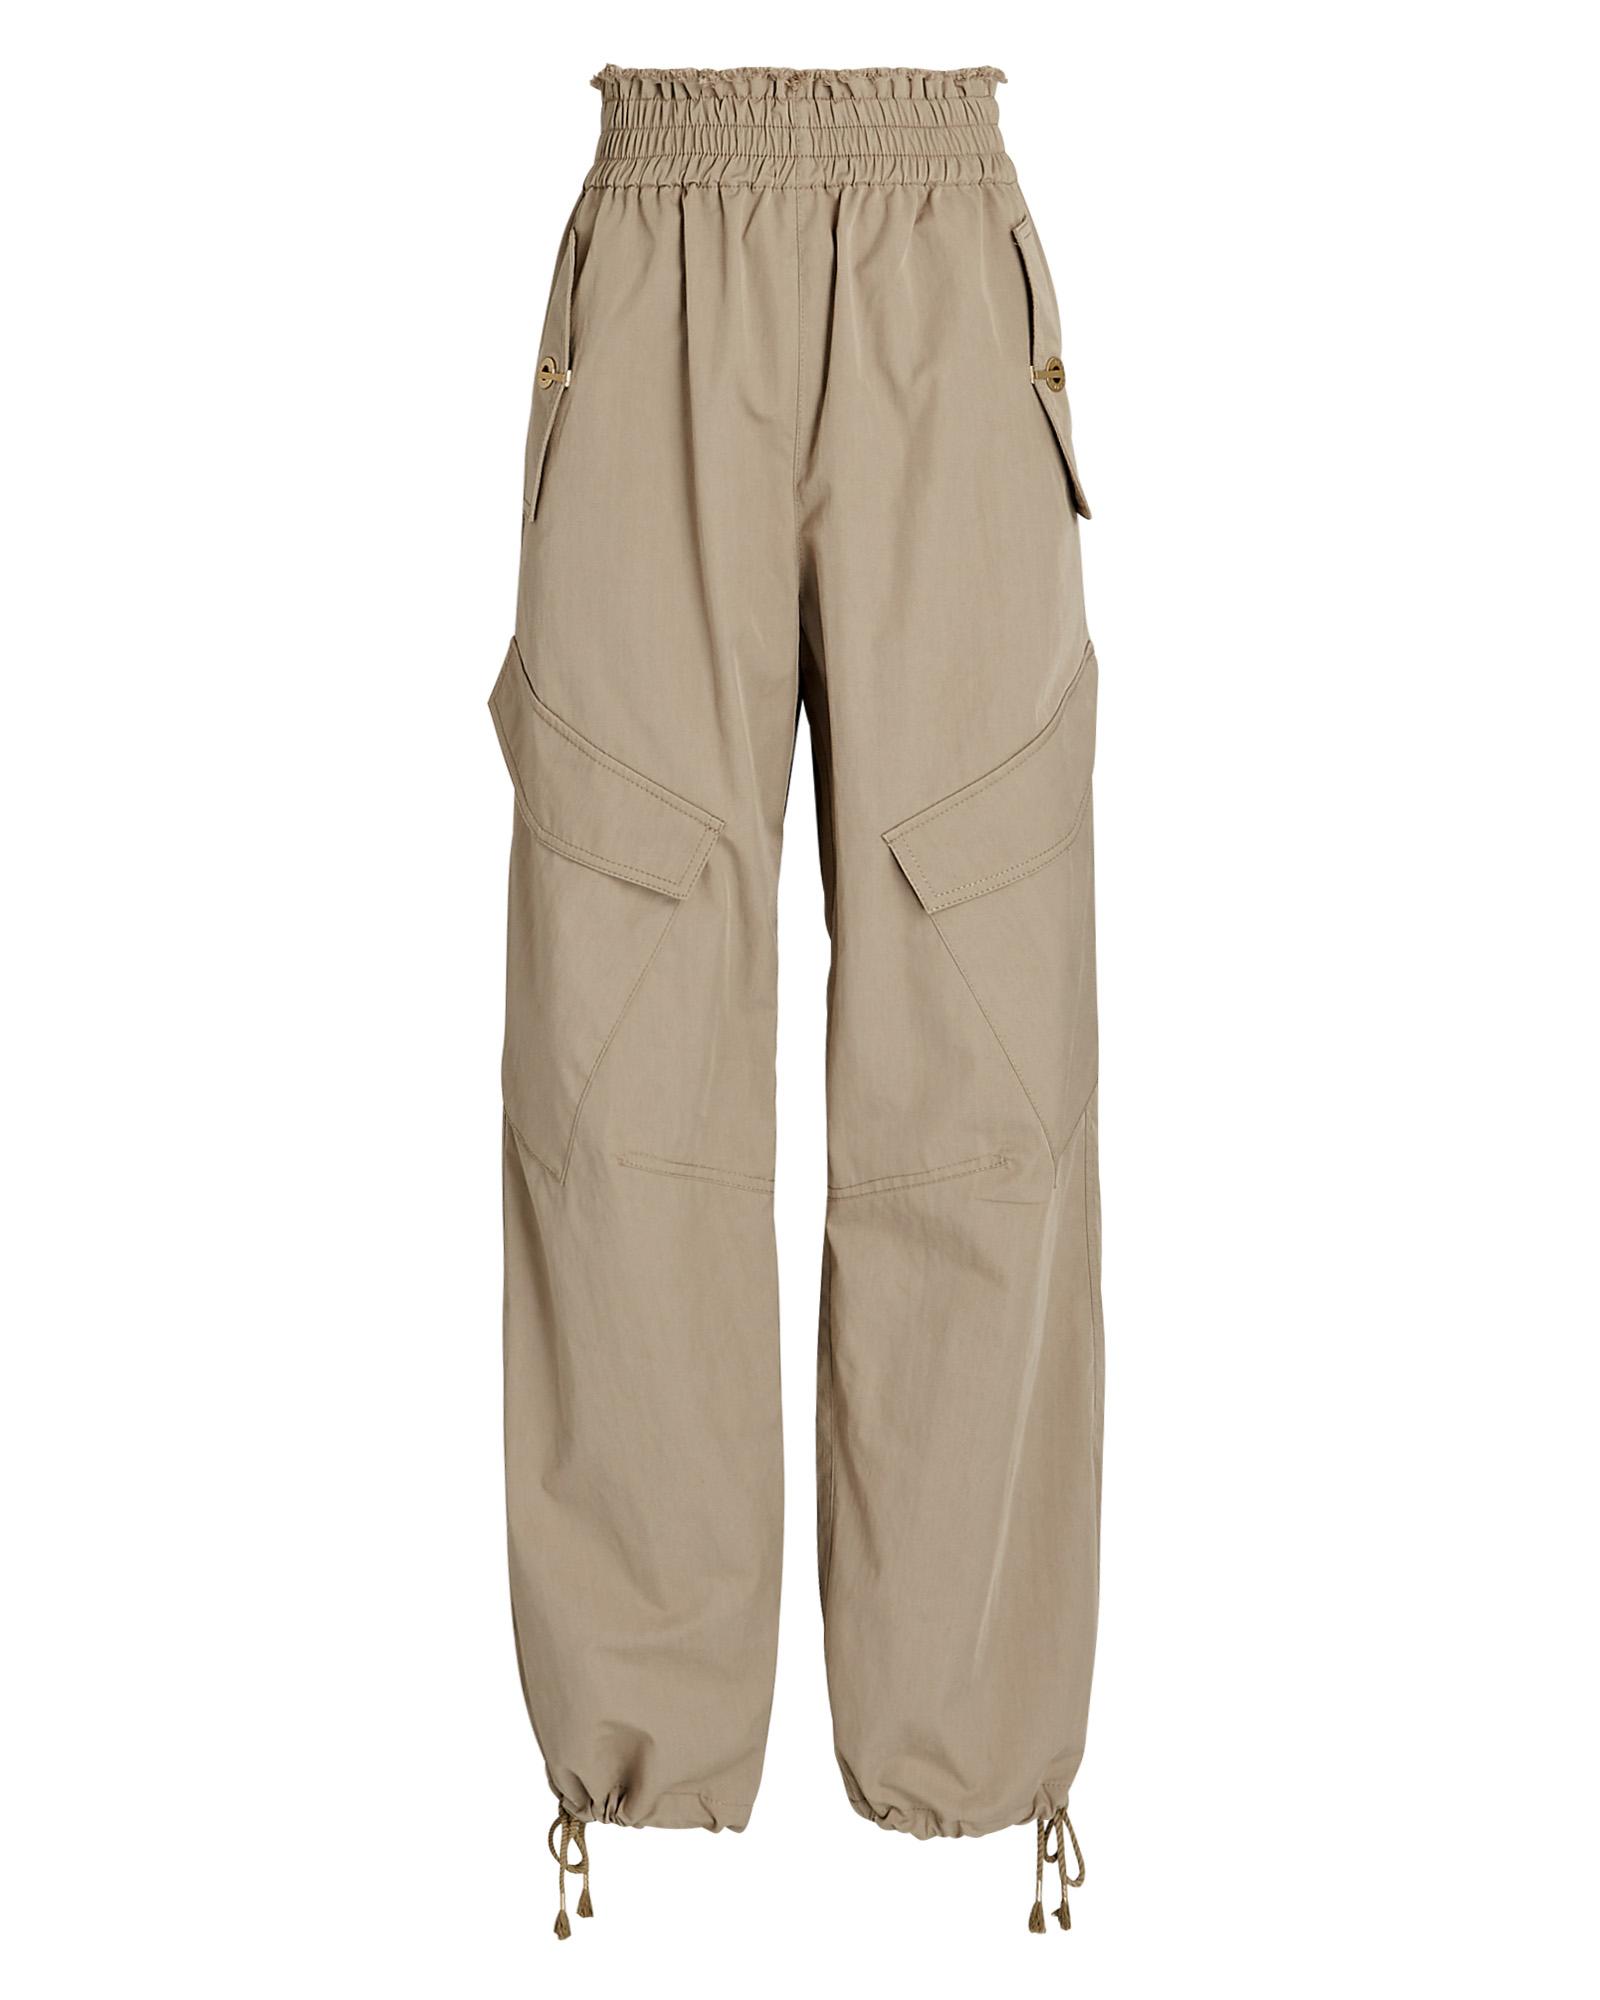 Dion Lee Frayed Rope Cotton Blend Cargo Pants in Natural | Lyst